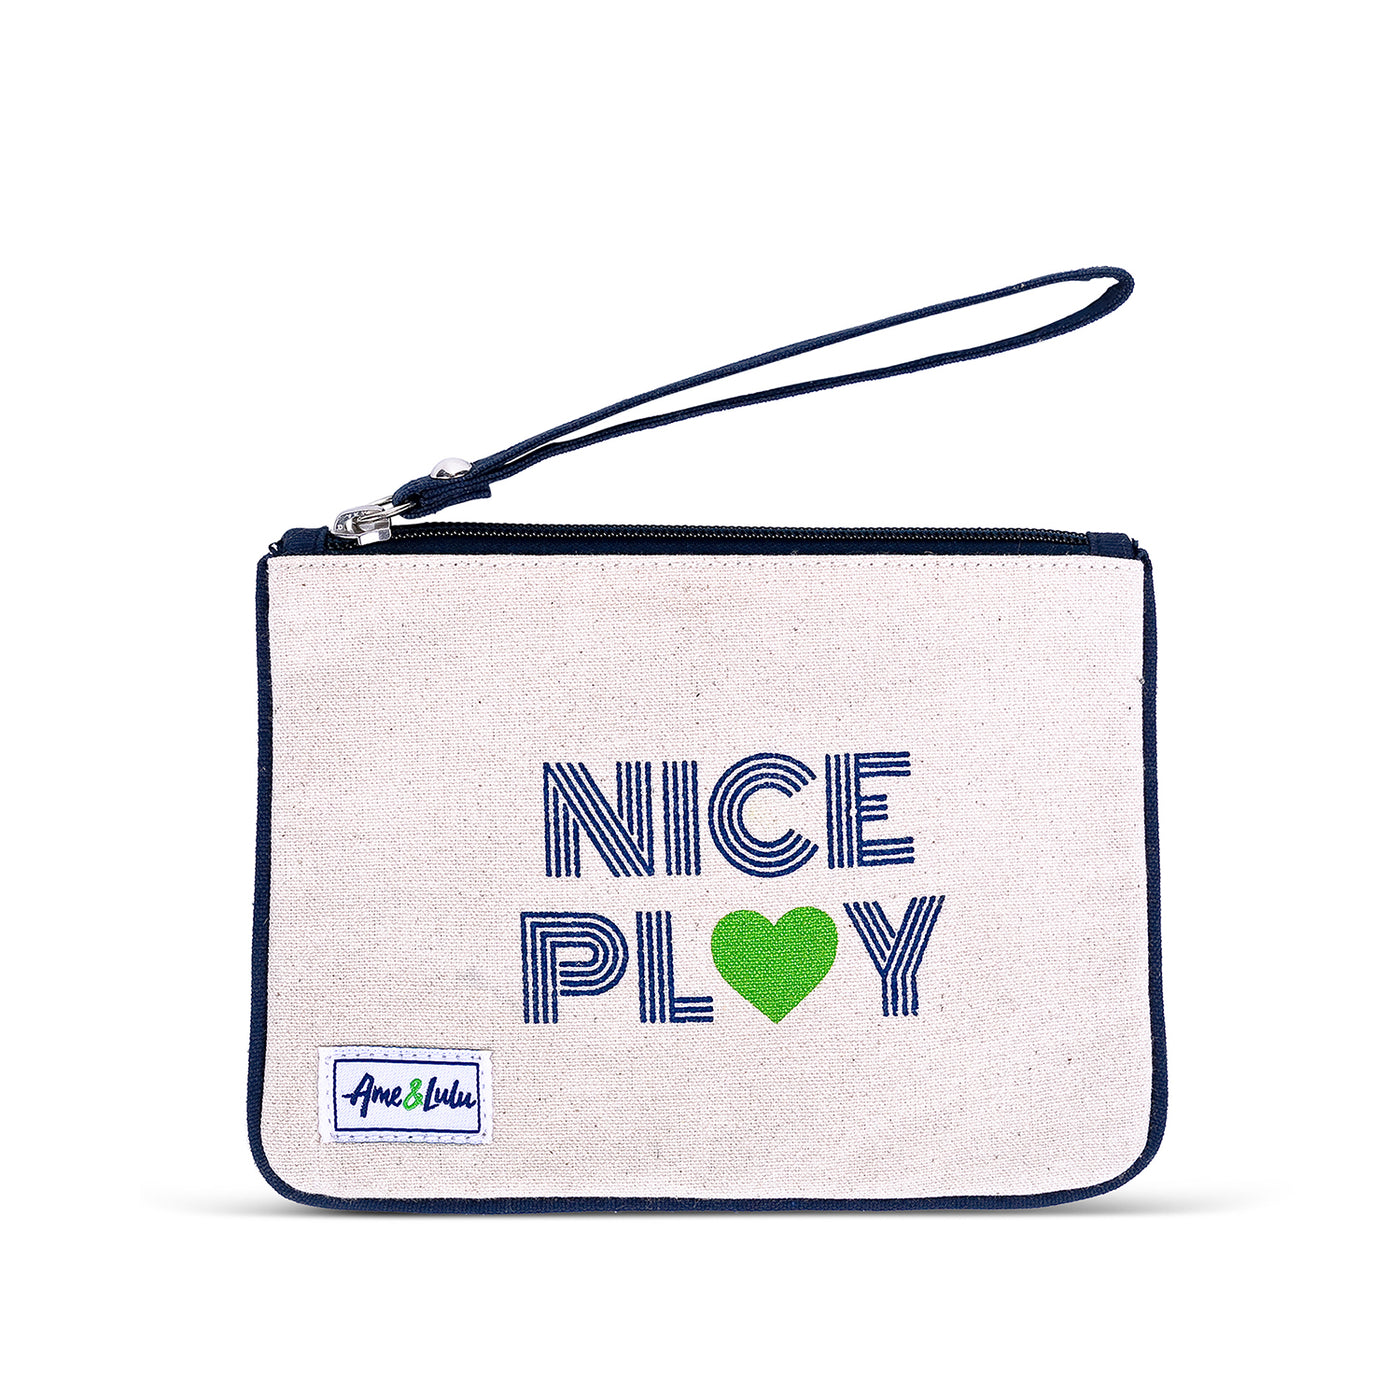 Small tan canvas wristlet with navy trim and strap. Front has the words "nice play" printed on the front in navy with a green heart